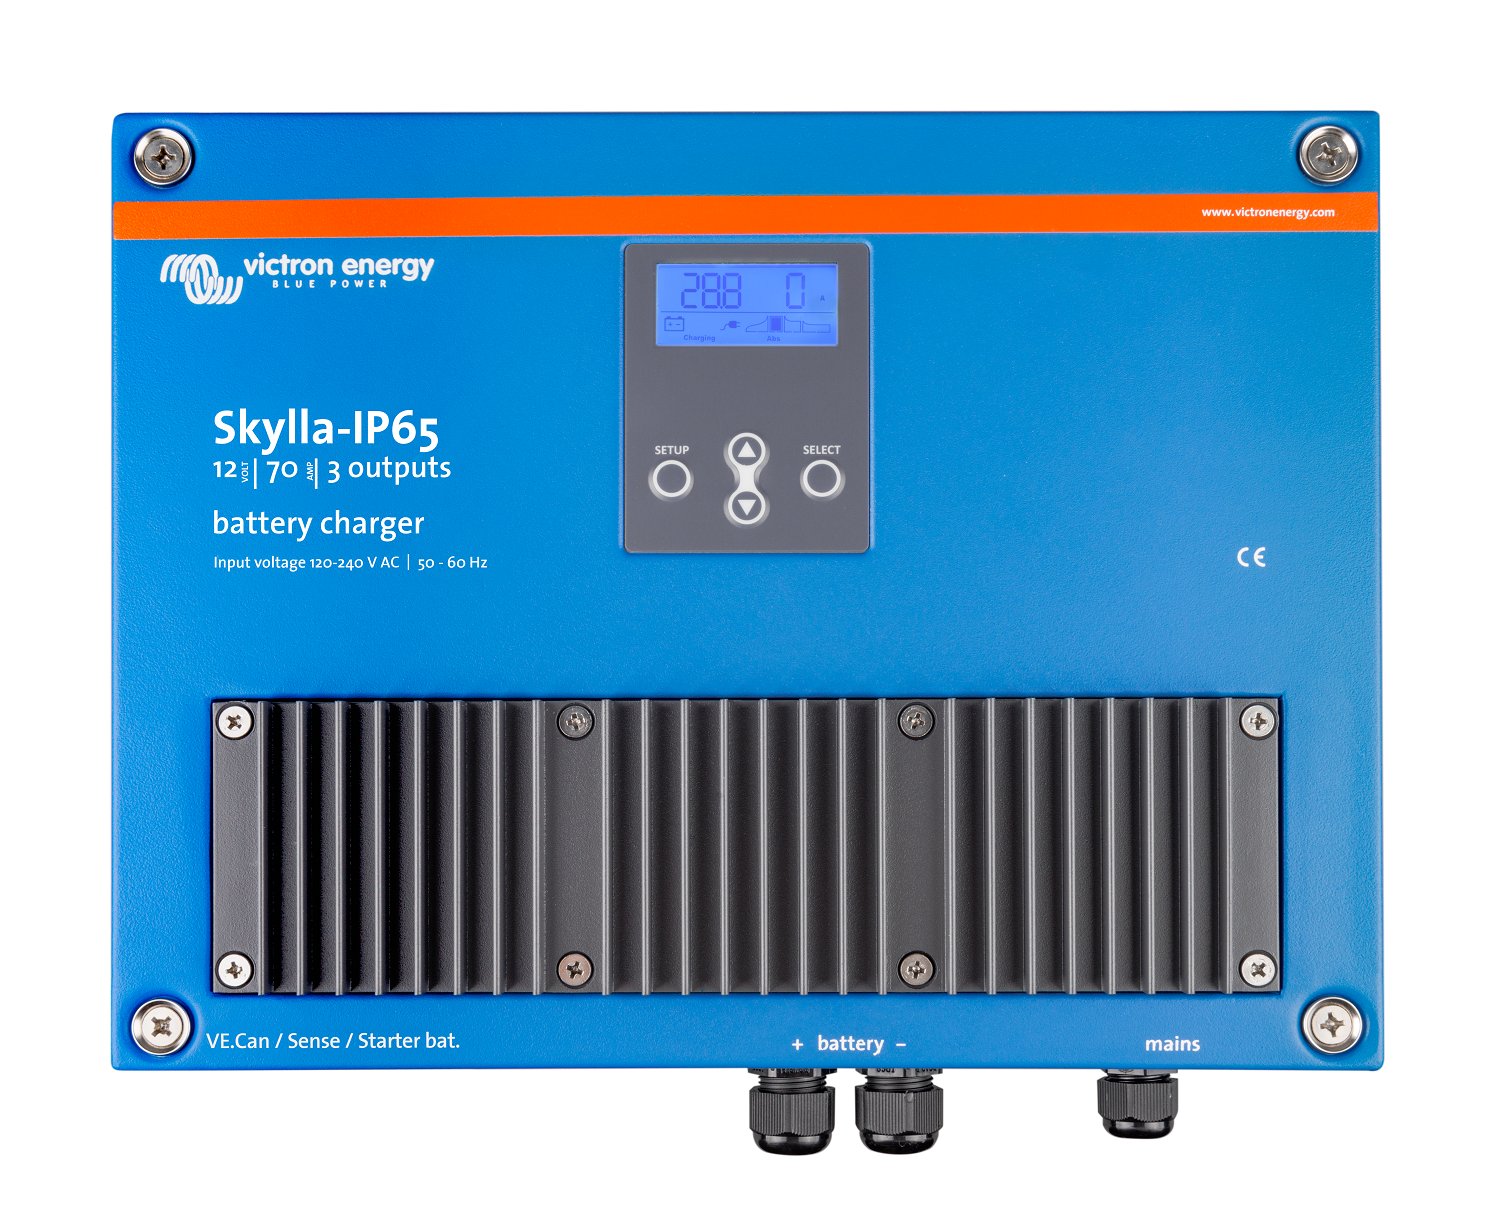 Victron SKY012070100 Skylla-IP65 12/70(3) 120-240V Battery Charger Questions & Answers